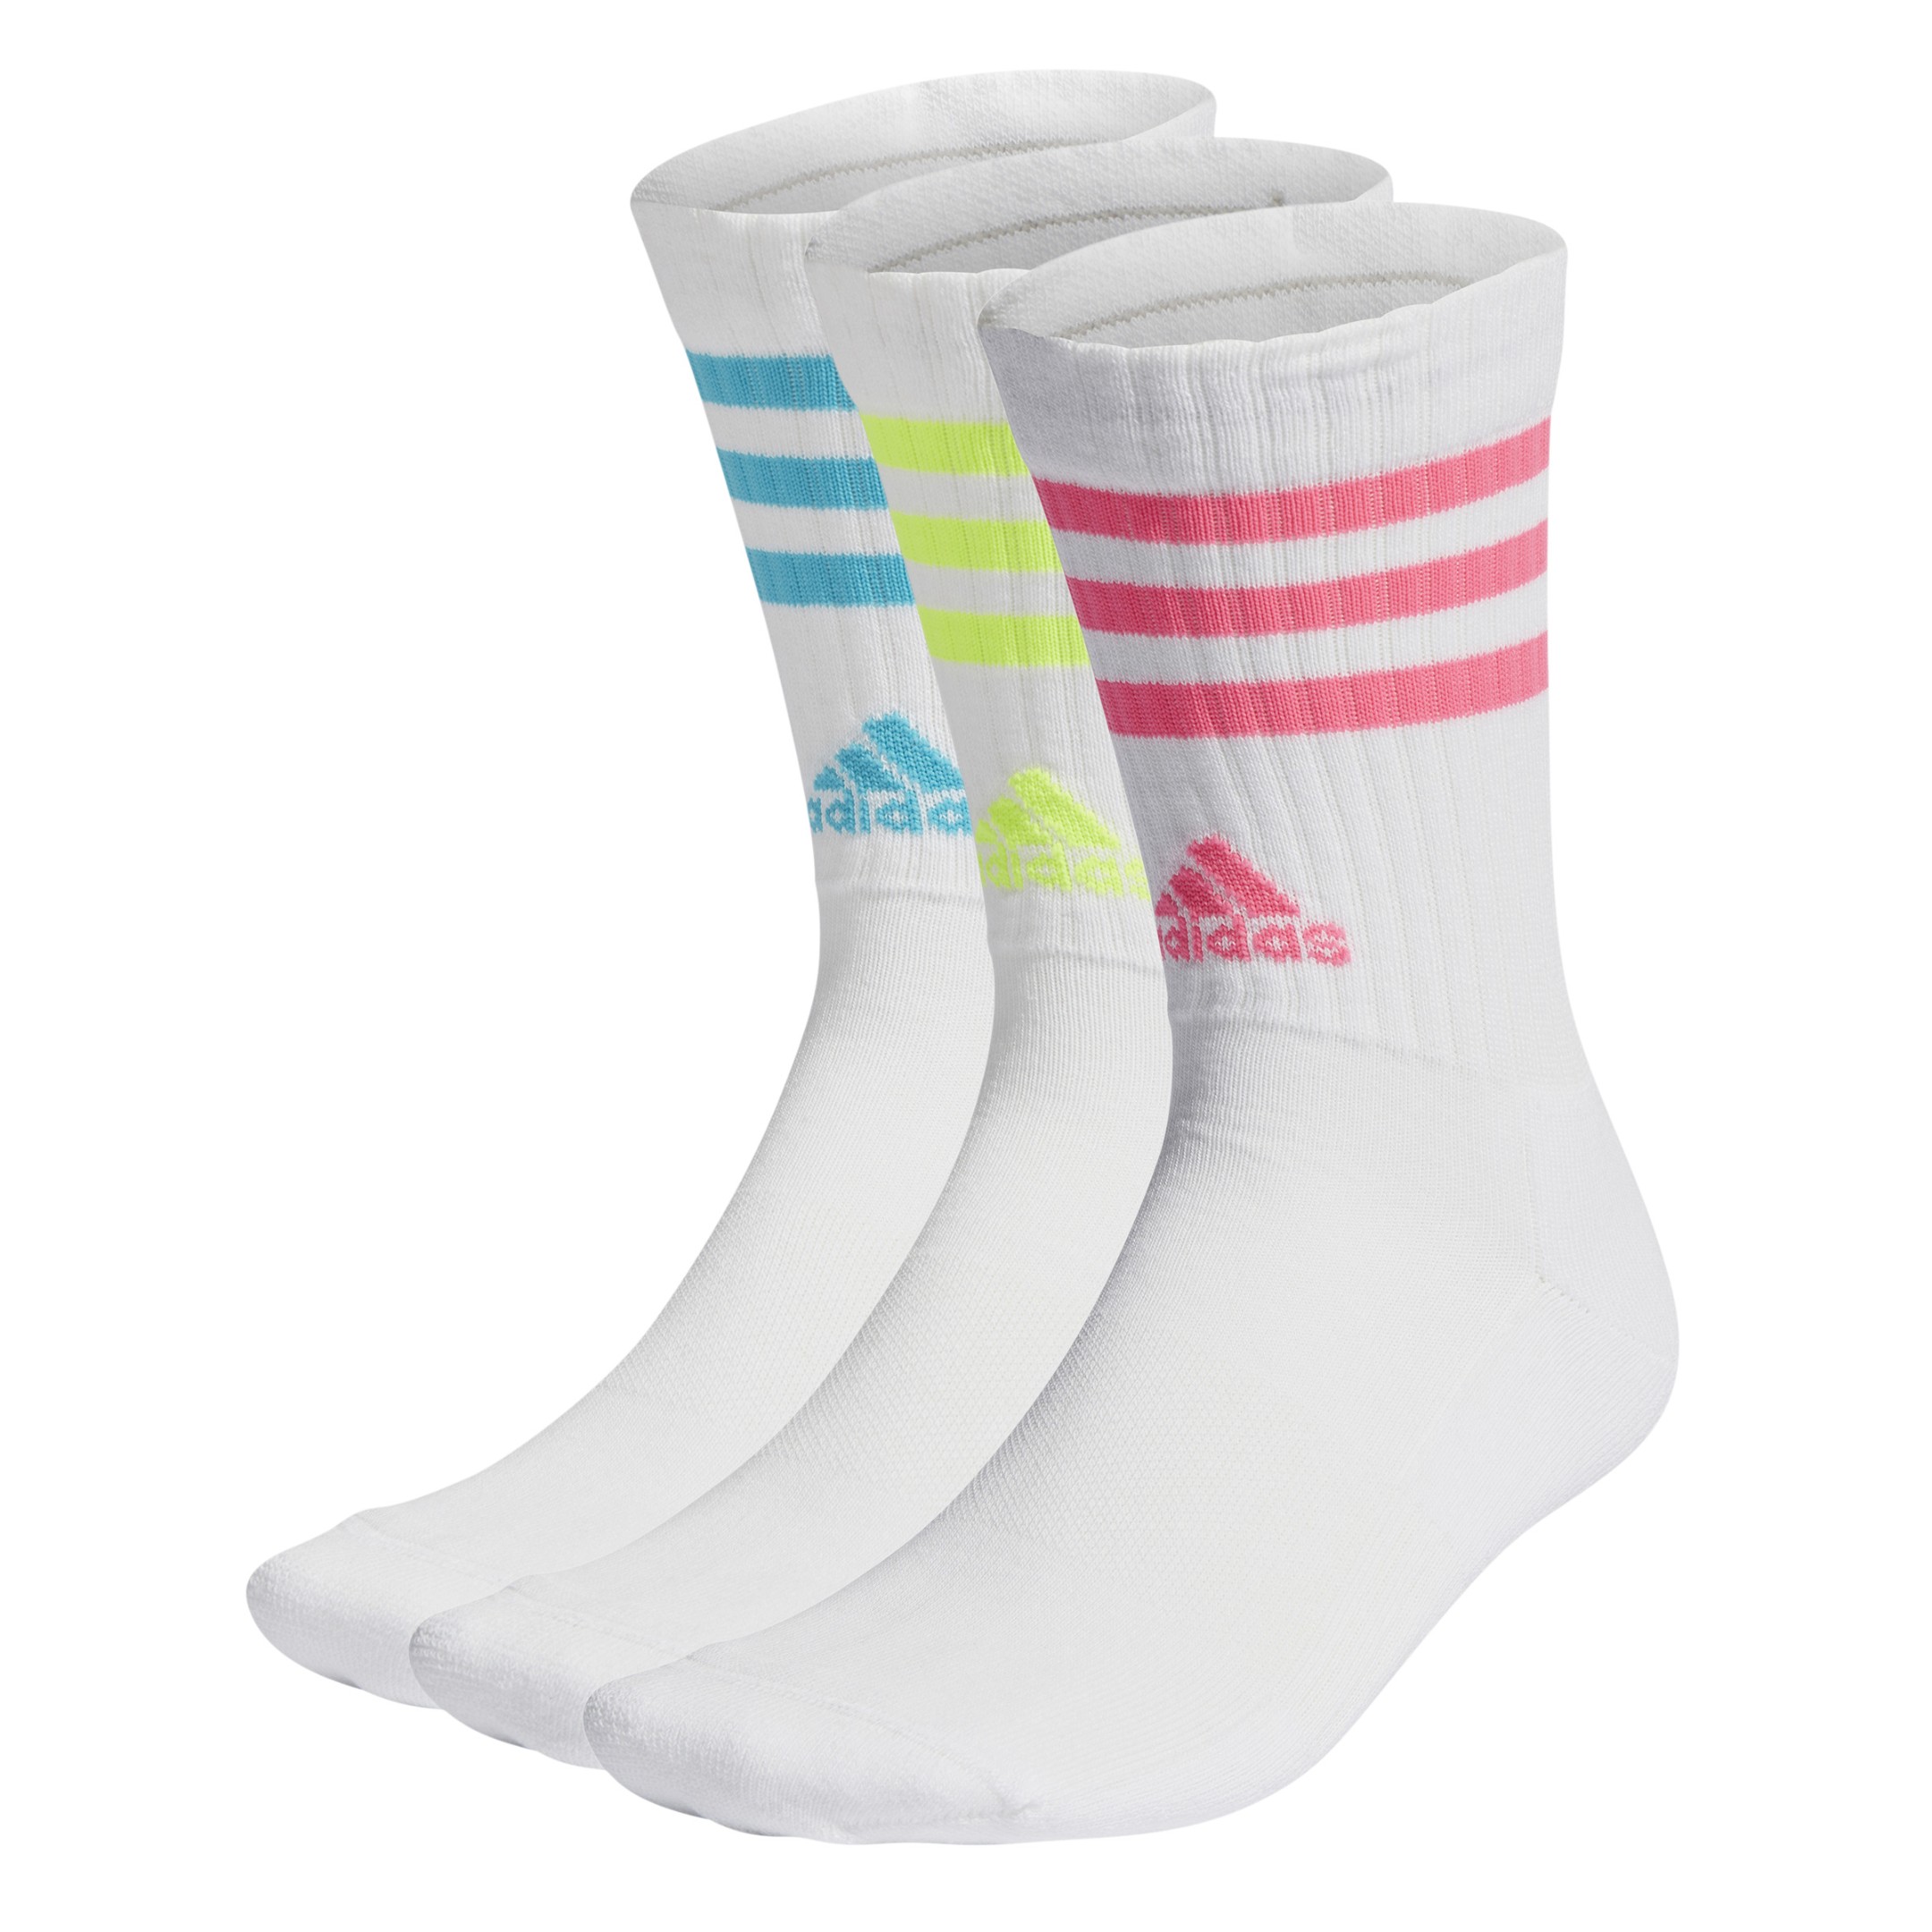 CALCETINES CLSICOS CUSHIONED 3 BANDAS WHITE / LUCID CYAN / LUCID LEMON / LUCID PINK